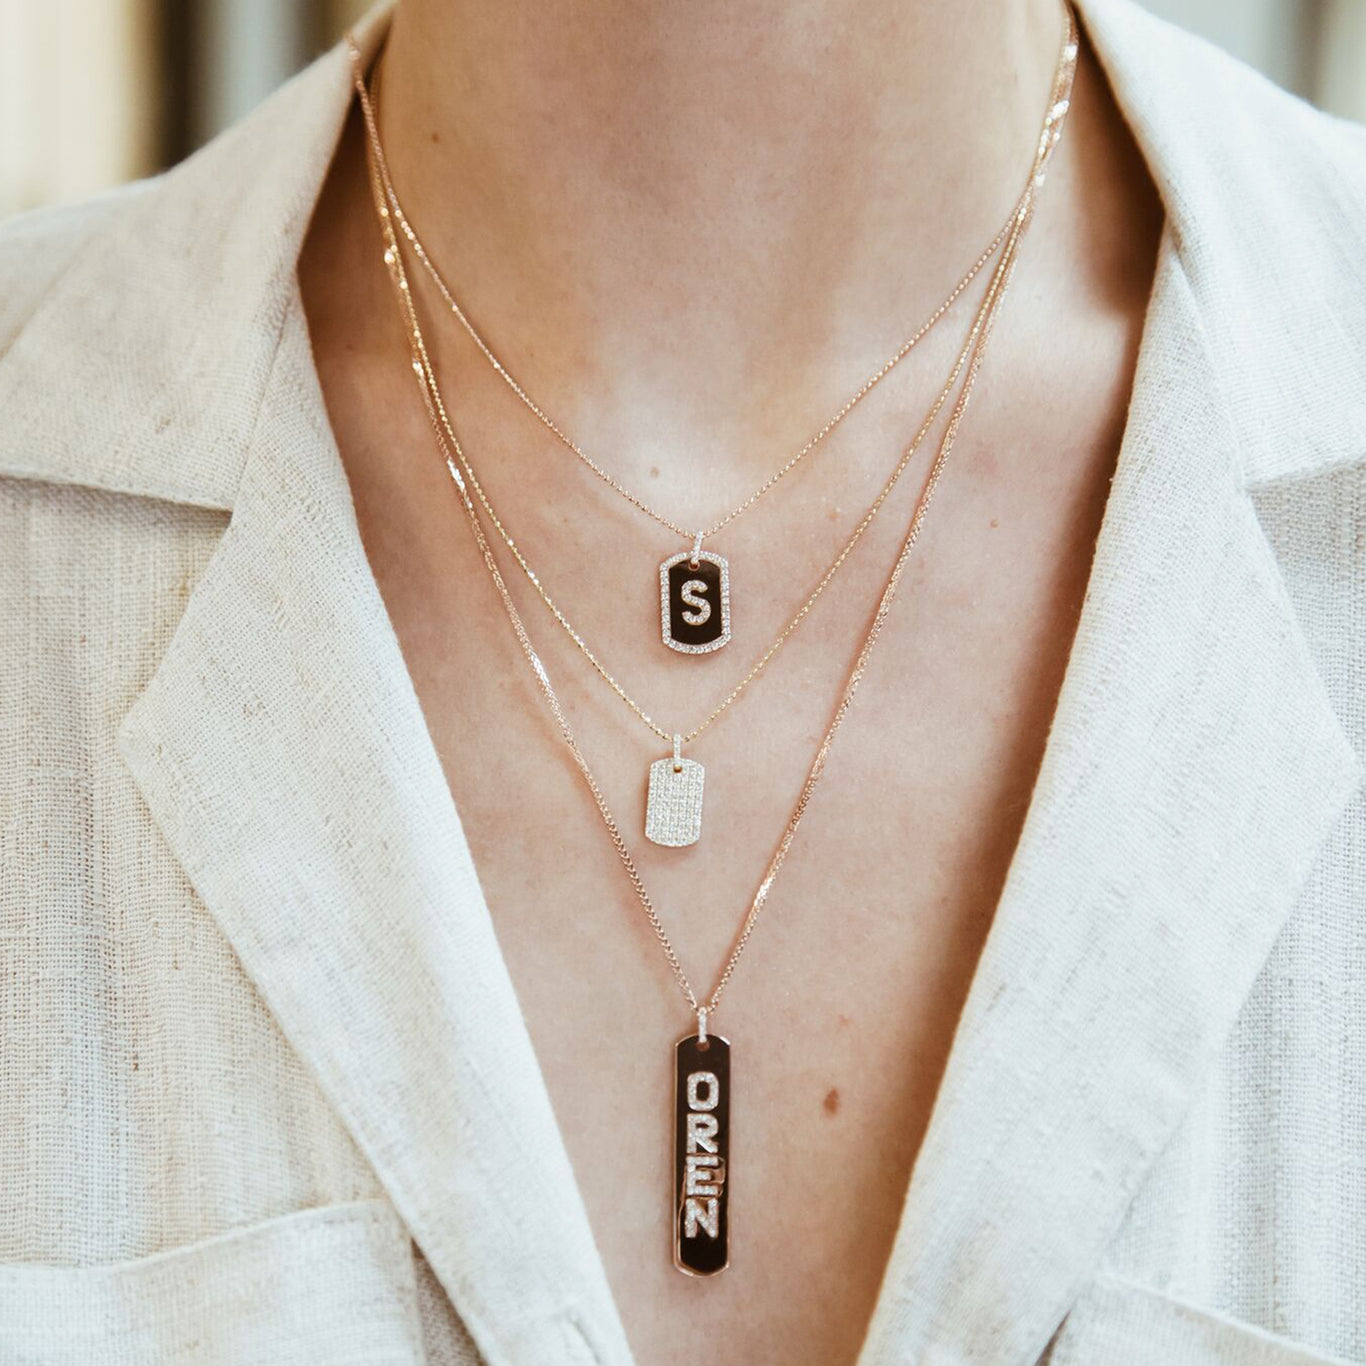 Longtag Necklace shown layered with the Initial Diamond Dogtag and the Diamond Dogtag.